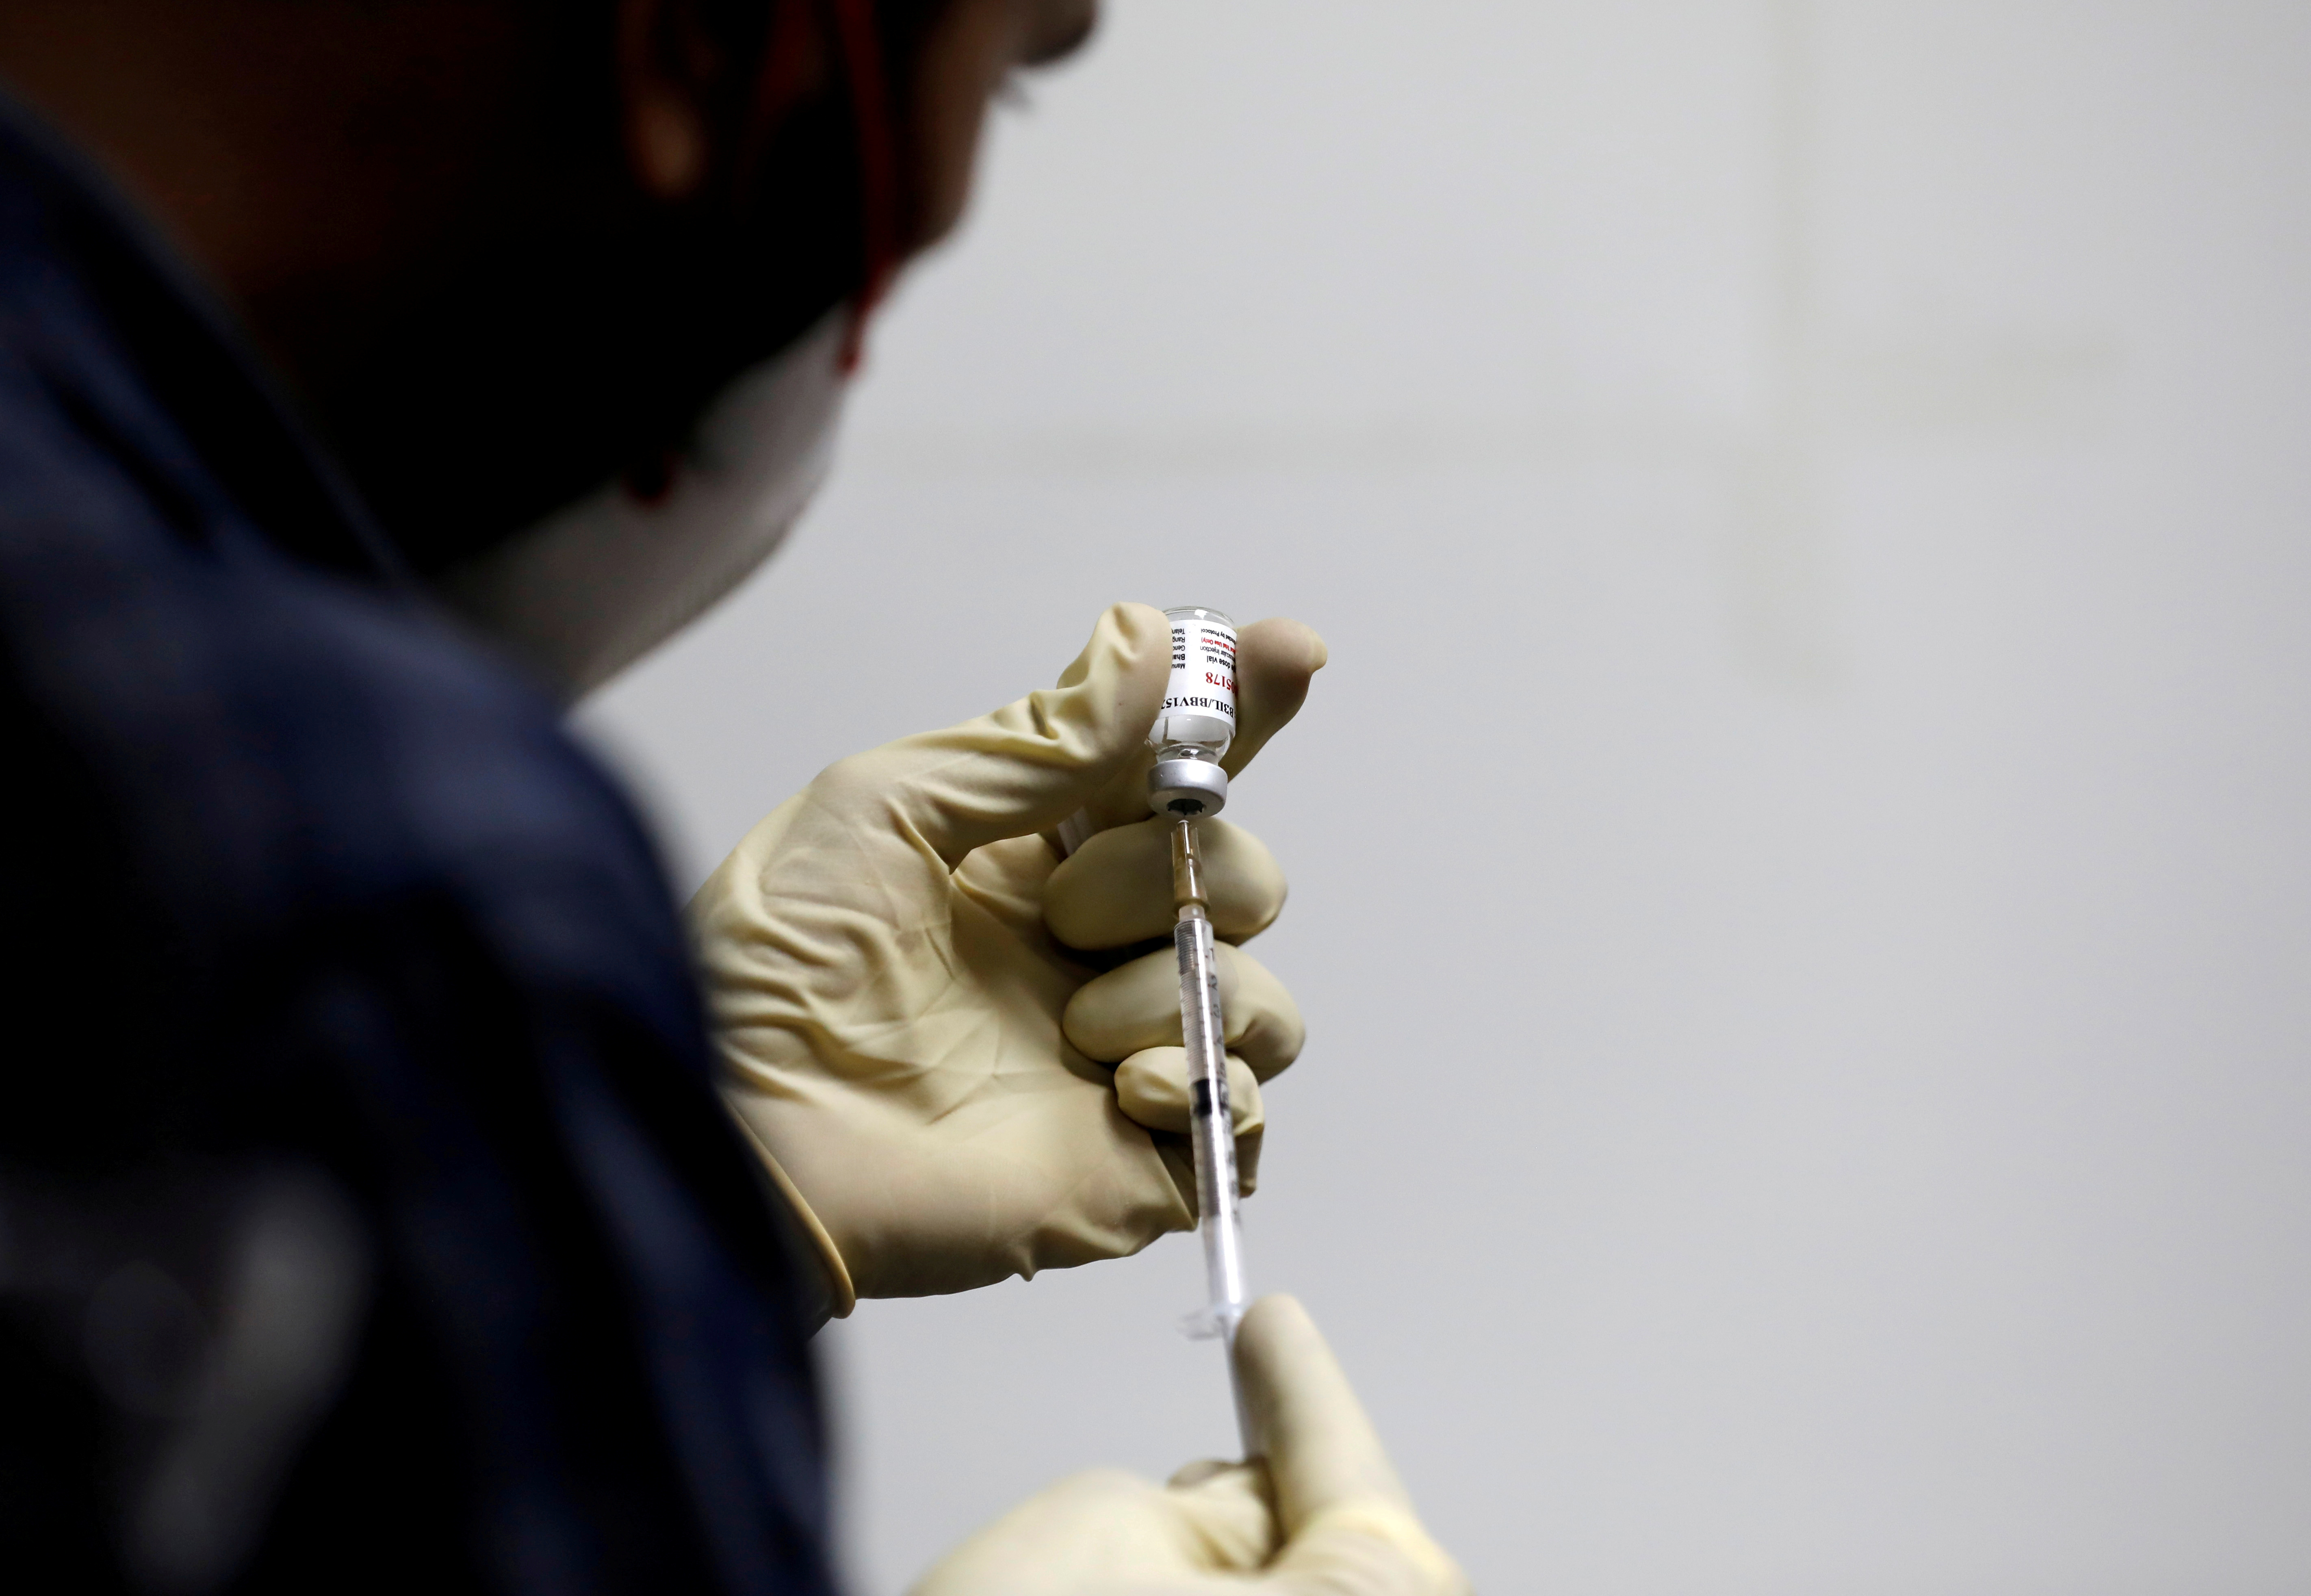 A medic fills a syringe with COVAXIN, an Indian government-backed COVID-19 vaccine, before administering it to a health worker during its trials, at the Gujarat Medical Education and Research Society in Ahmedabad, India, November 26, 2020. REUTERS/Amit Dave